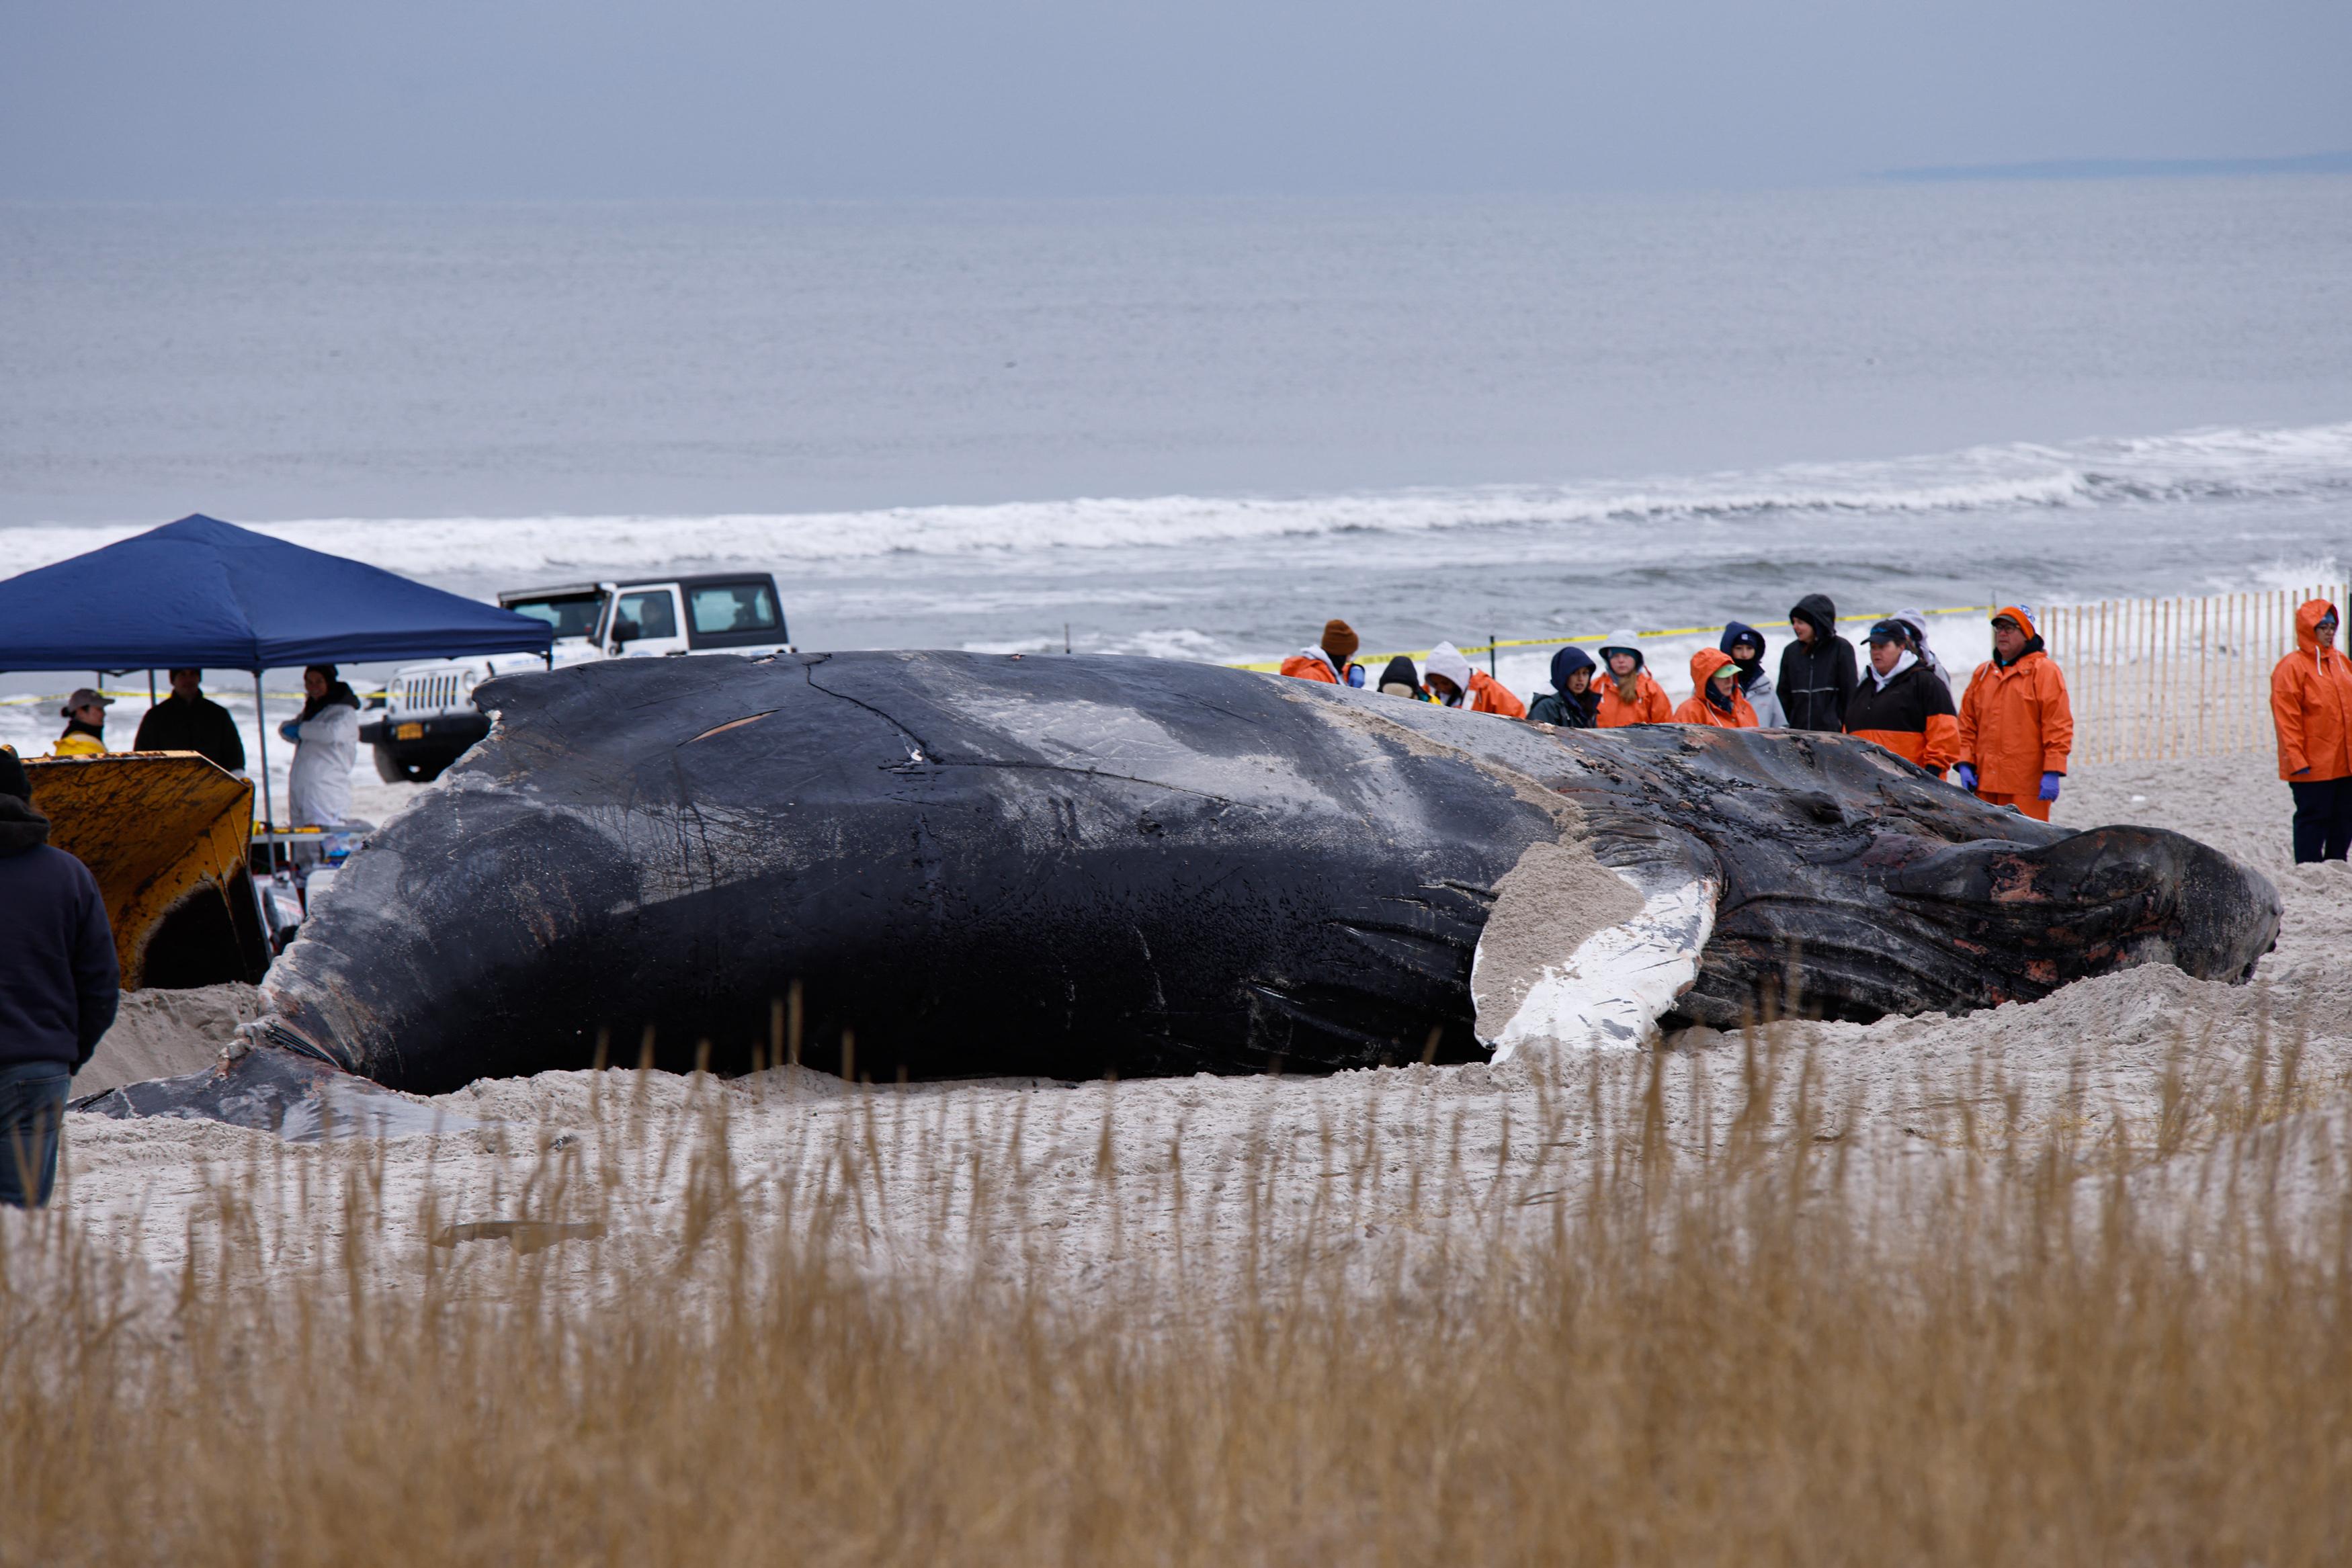 People on a beach surround a washed-up whale carcass.